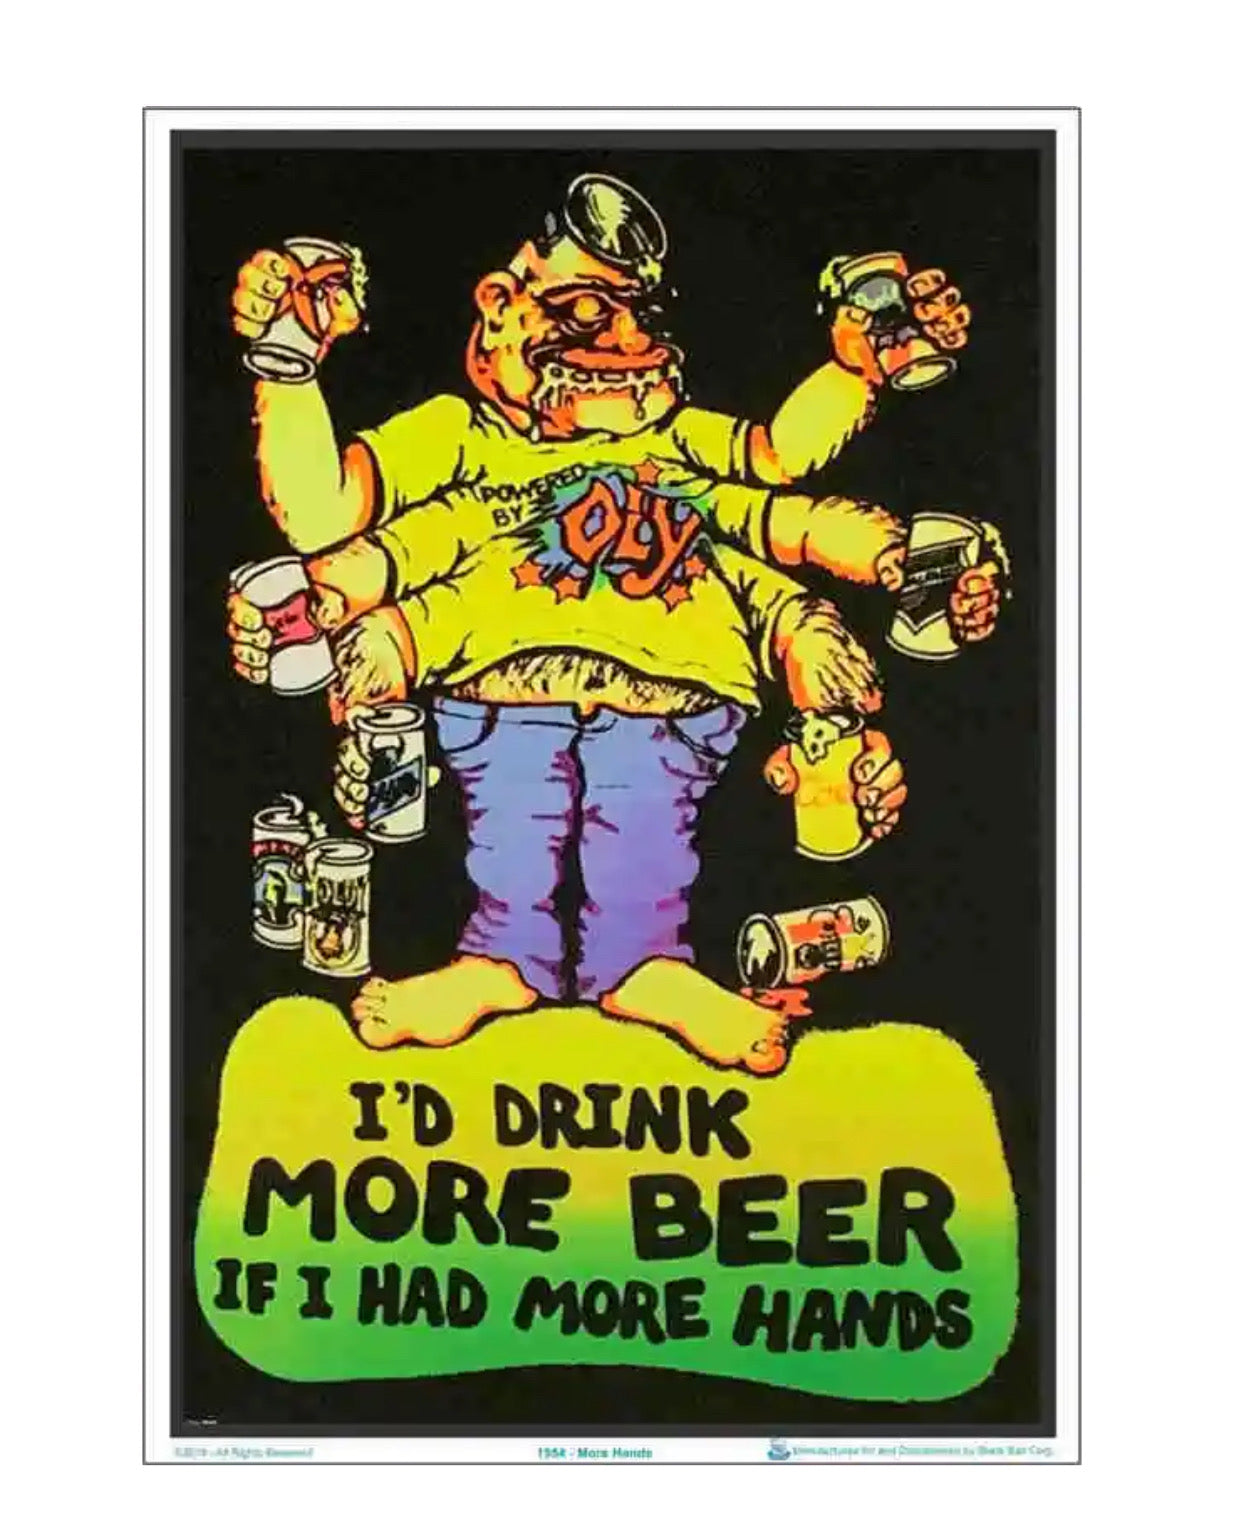 " i'd drink more beer if i had more hands" poster